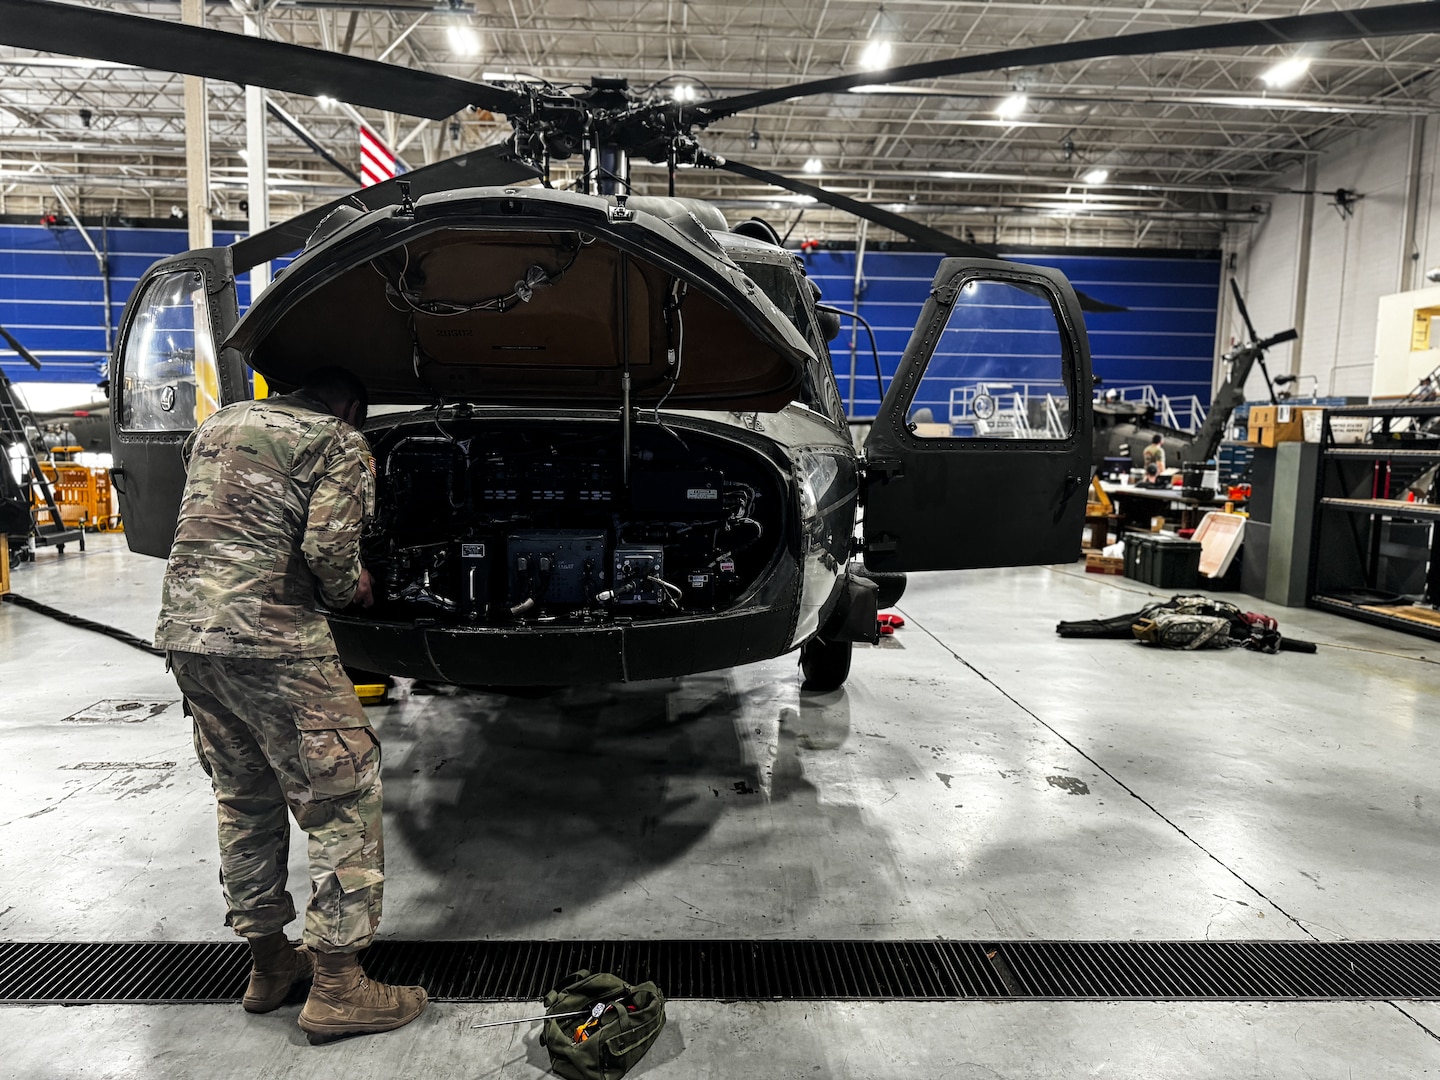 Virginia National Guard Soldiers conduct maintenance on a UH-60 Black Hawk helicopter April 2, 2024, at the Army Aviation Support Facility in Sandston, Virginia. The Soldiers are part of the AASF’s avionics shop, which troubleshoots, diagnoses and repairs avionic components and wiring on the VNG’s Black Hawk fleet. (U.S. Army National Guard photo by Sgt. 1st Class Terra C. Gatti)